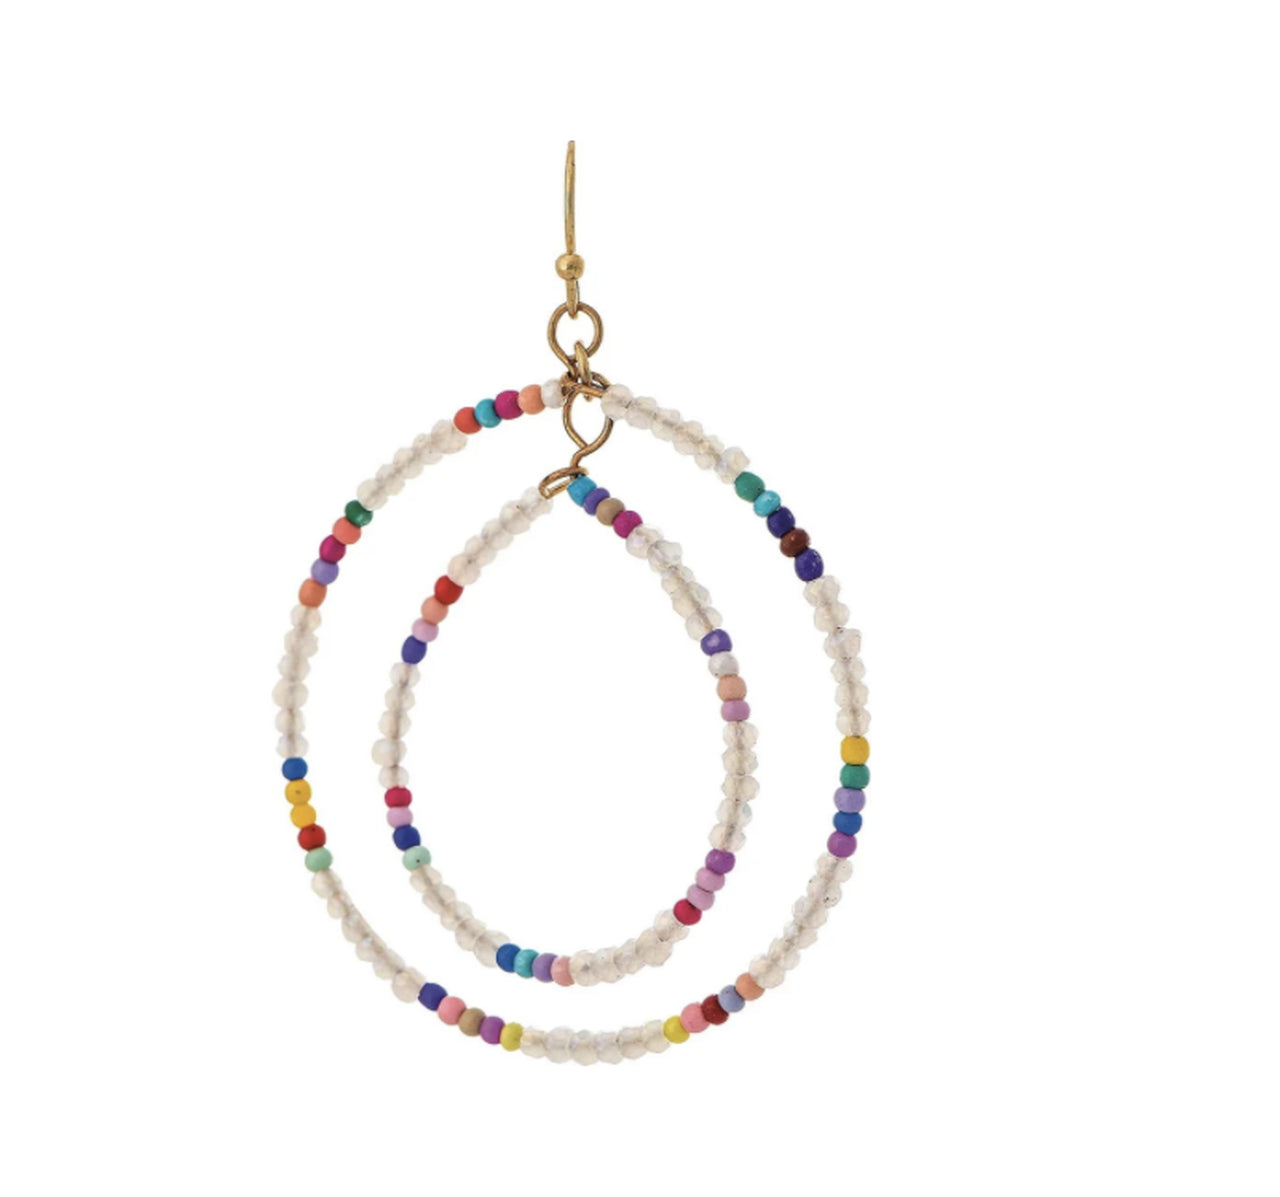 Mulicolored Rainbow Bead with Pearl Accents